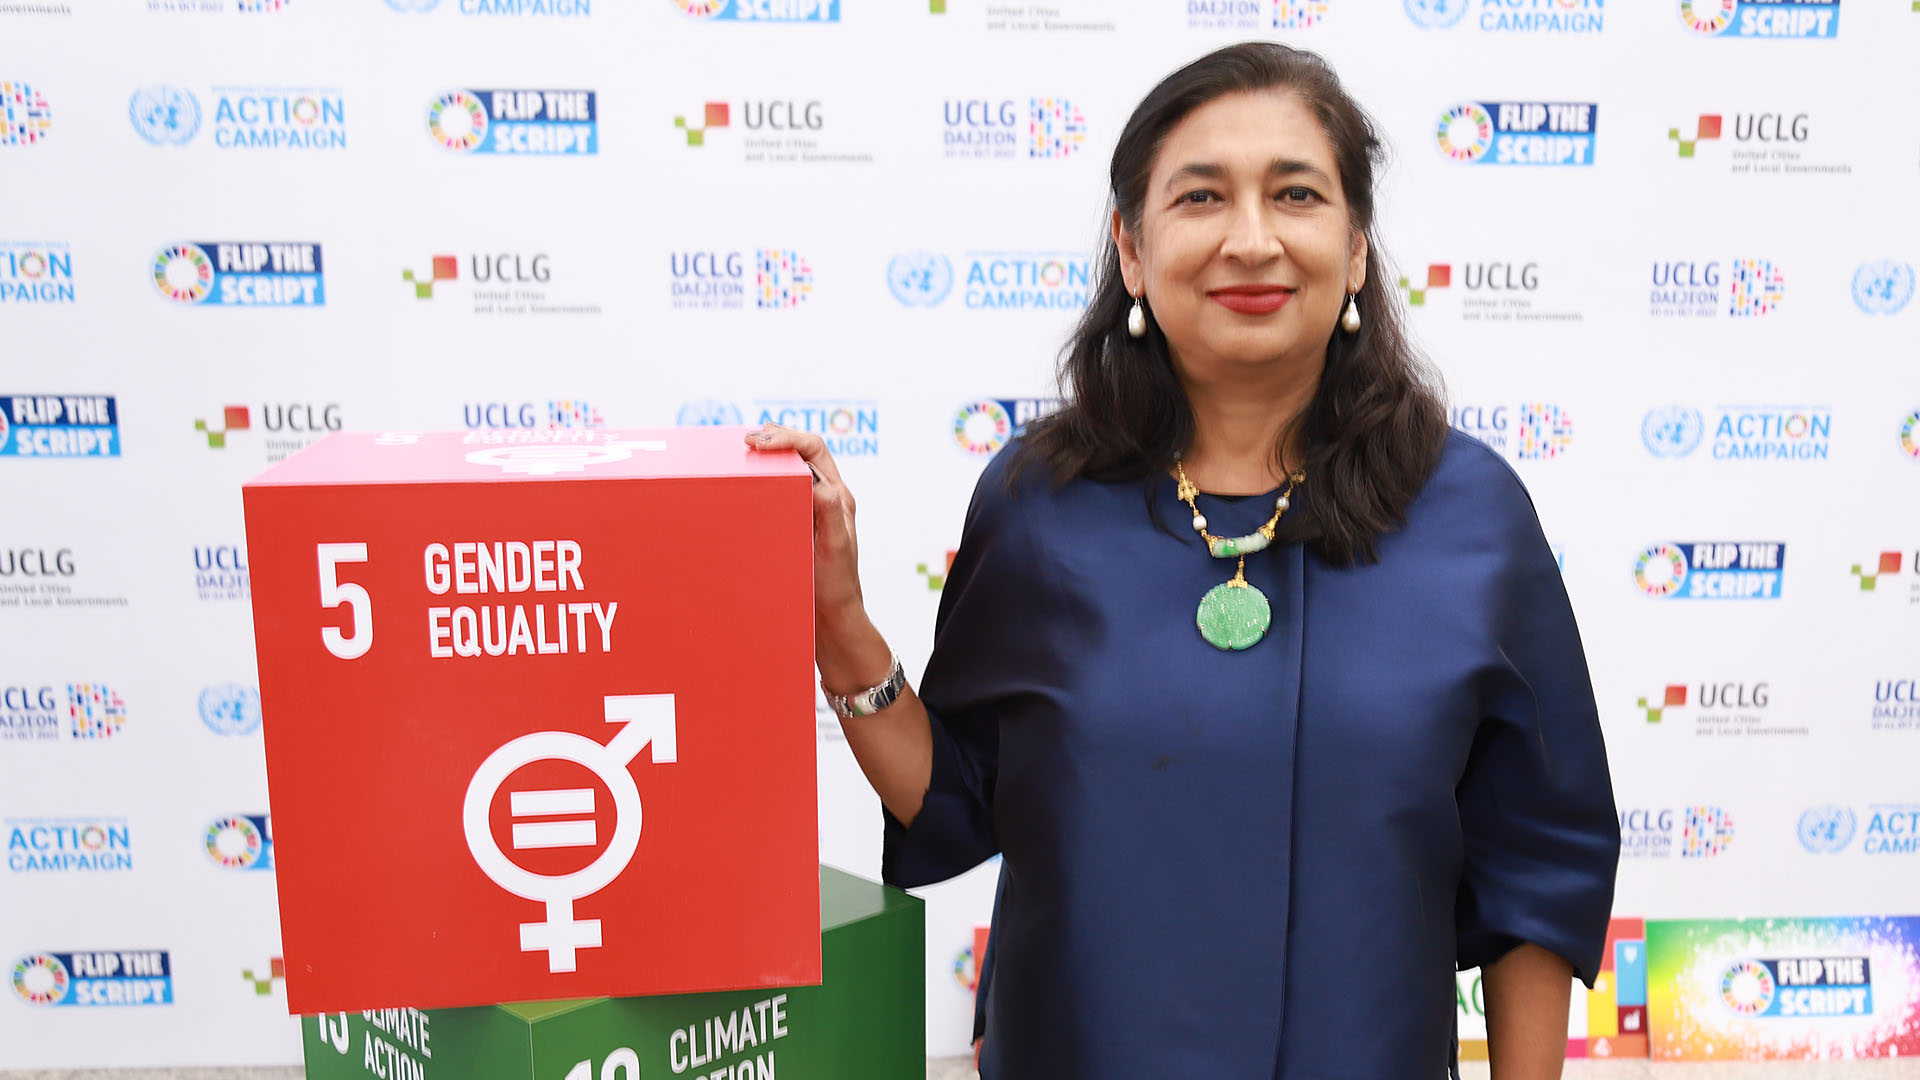 DED Bhatia participates in the 2022 Daejeon United Cities and Local Governments World Congress contributing to building and strengthening a global feminist municipal movement. Photo: UN Women/Yoomi Jun